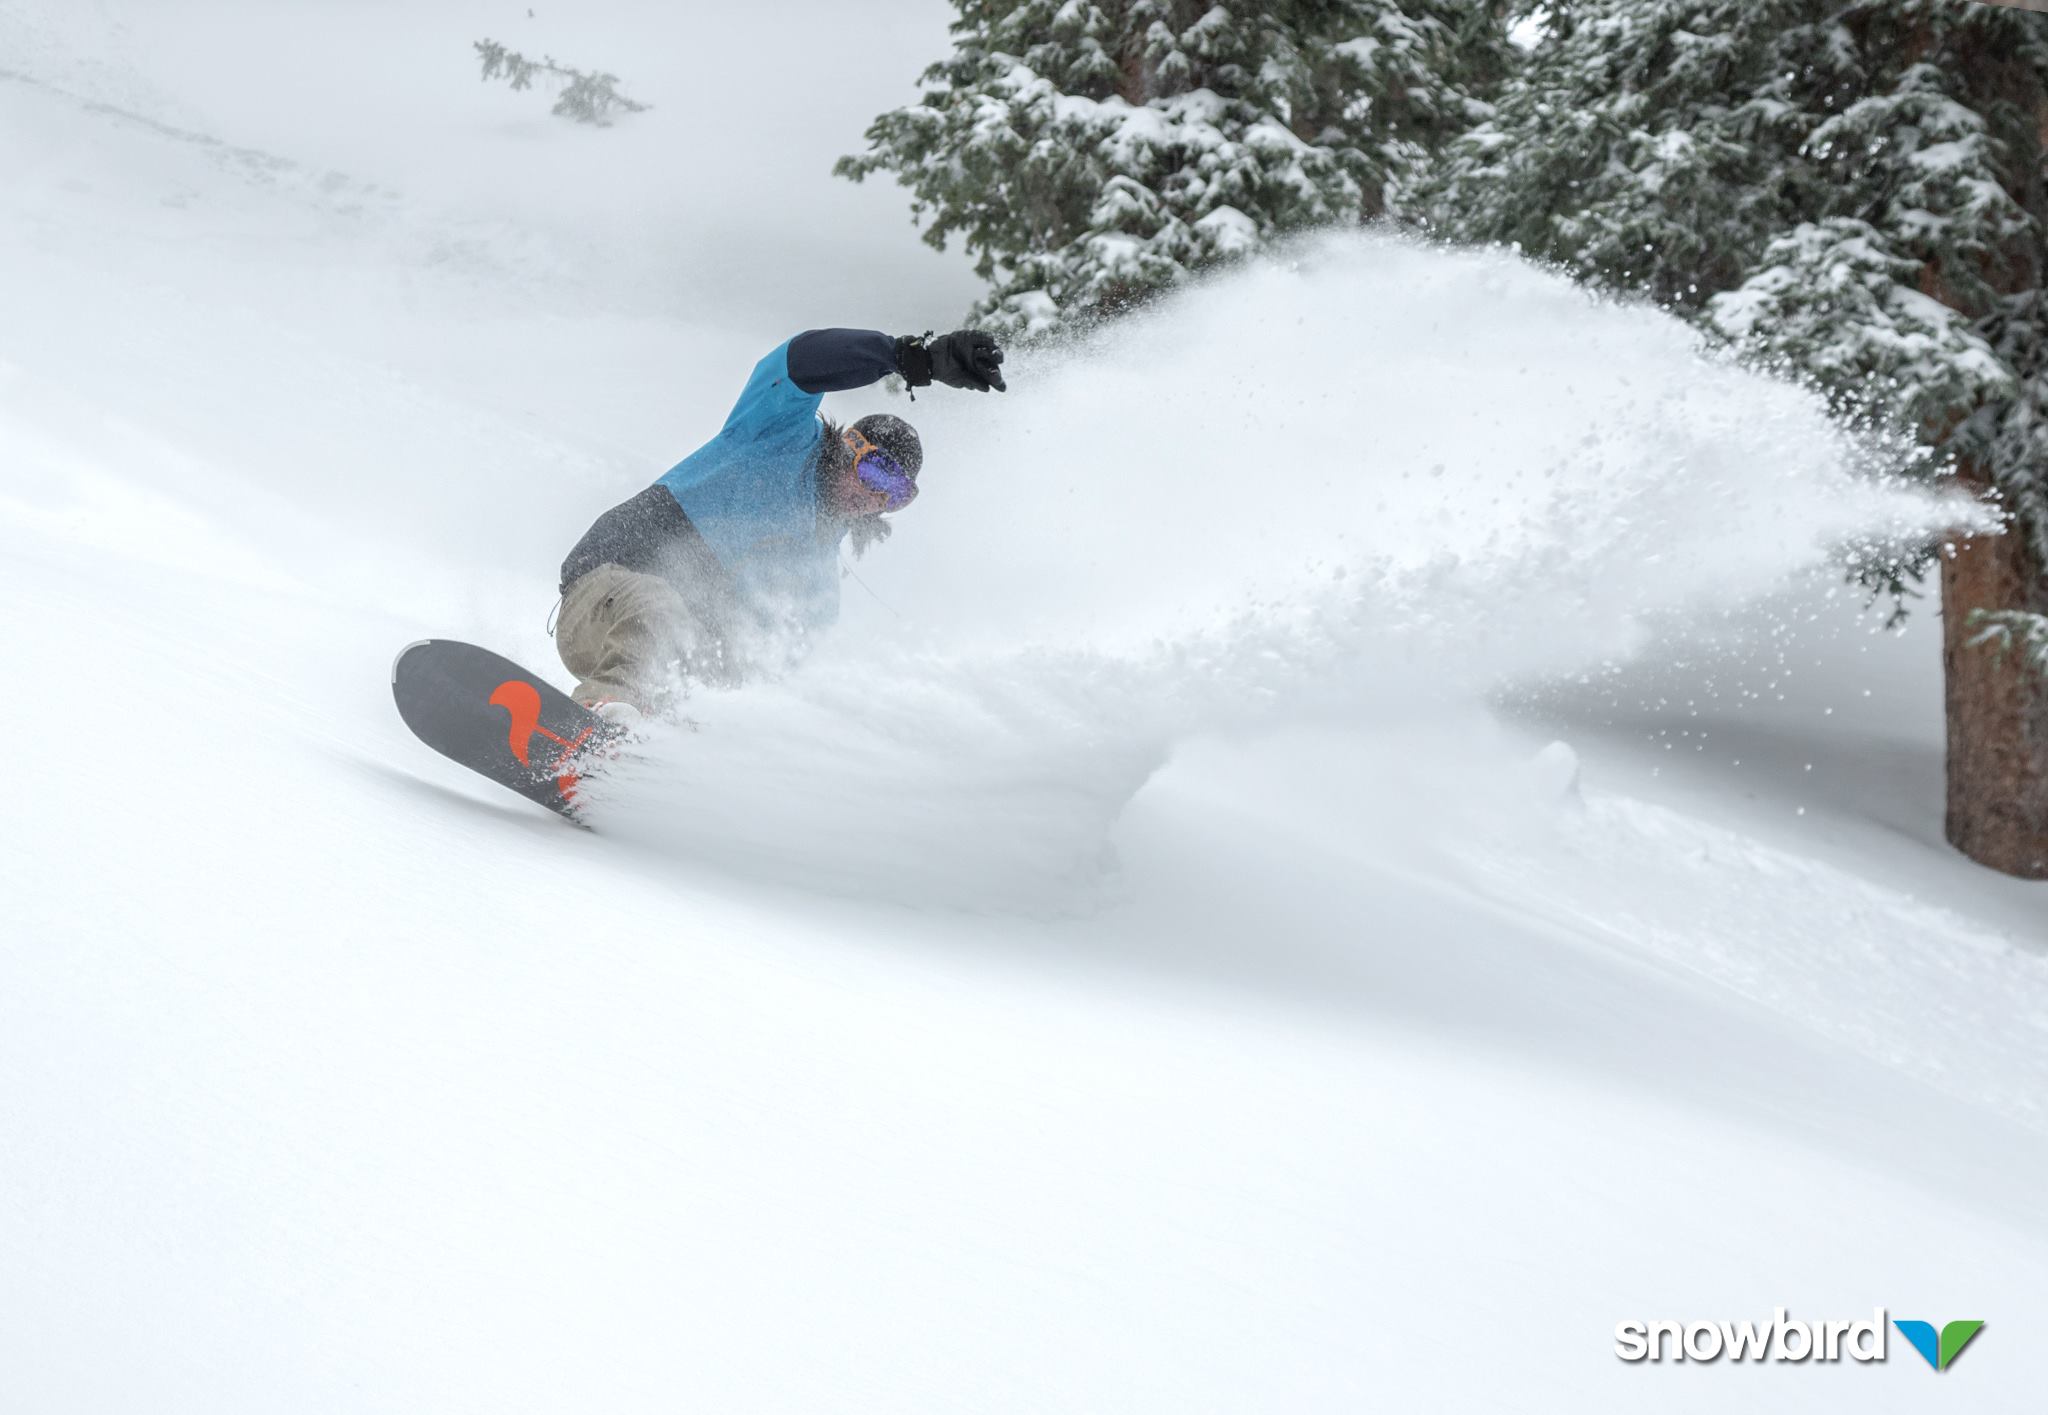 Snowbird, UT today after 13" in the past 48 hours. image: snowbird